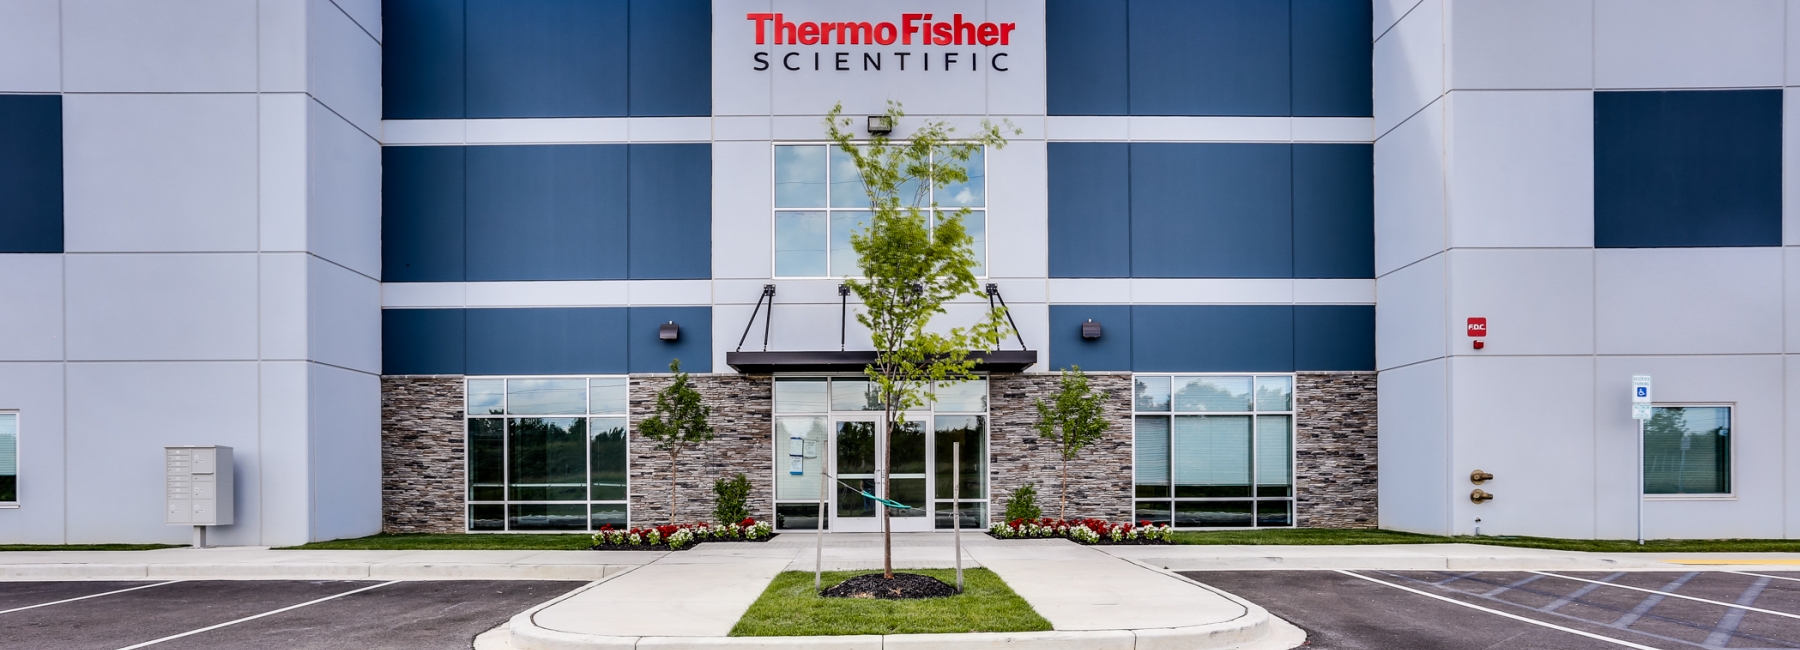 Thermo Fisher at Wedgewood West